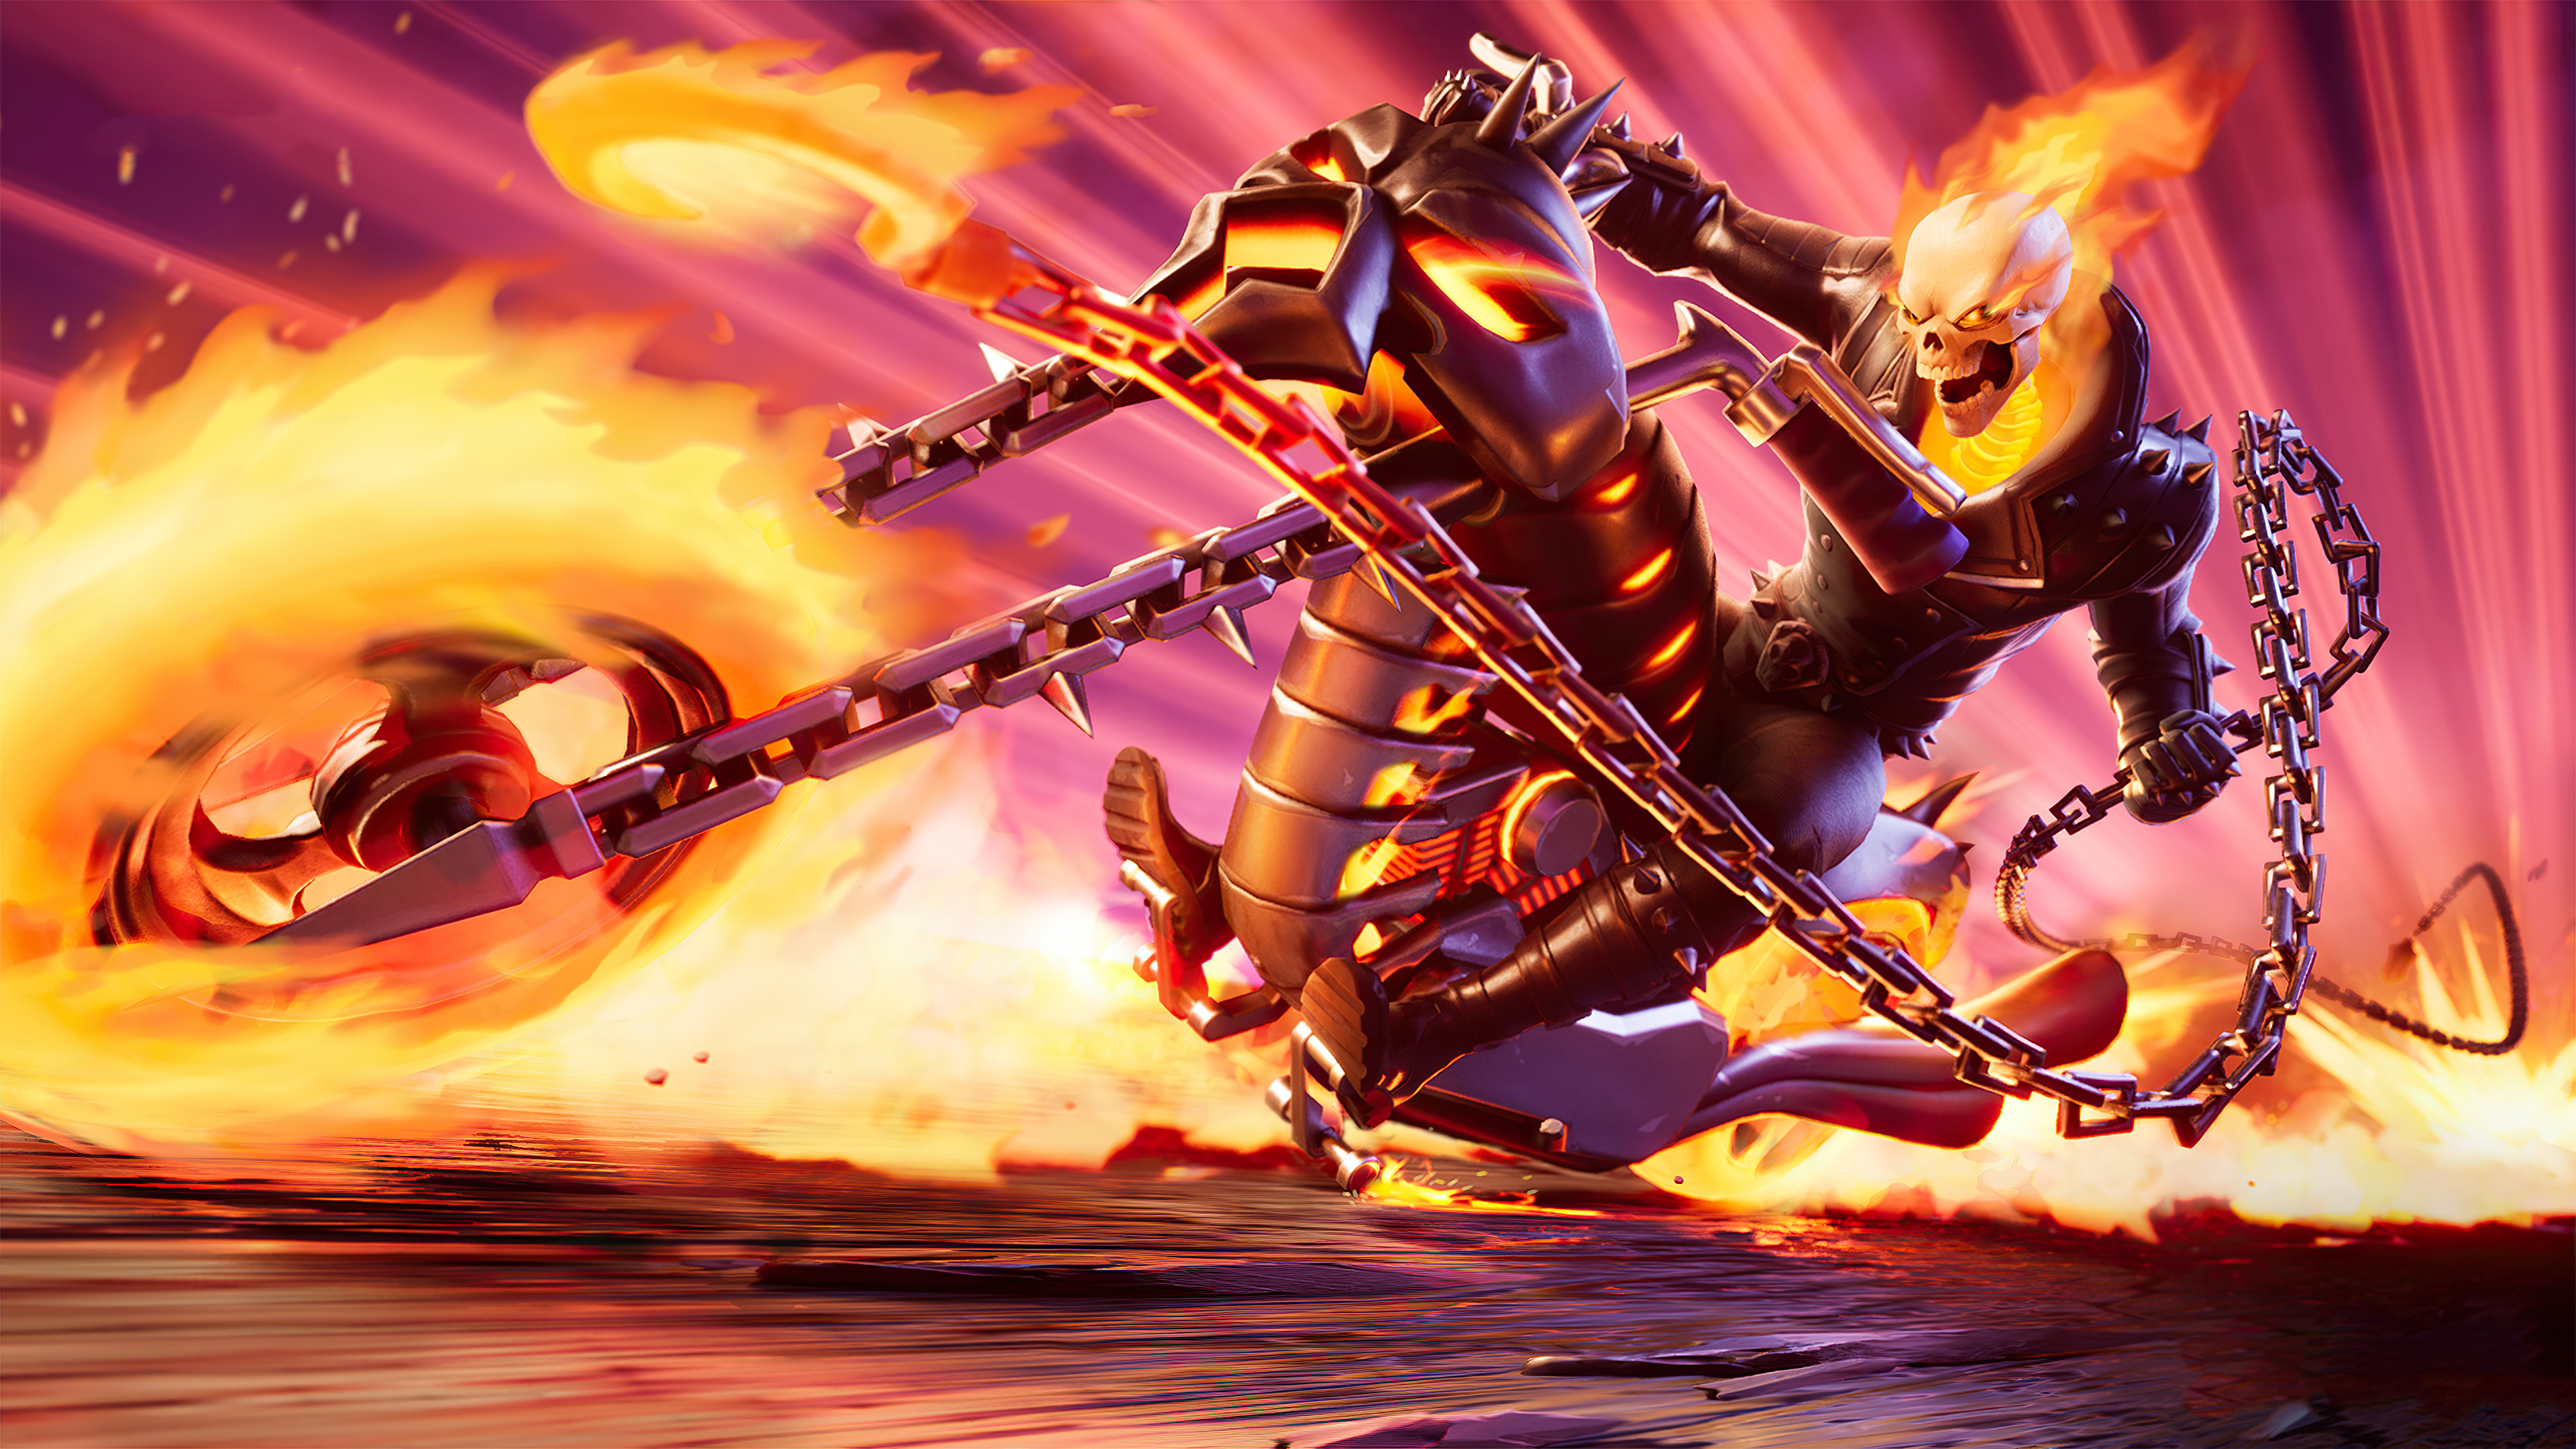 Ghost Rider Hd Live Wallpaper Download  Download Wallpaper Ghost Rider   640x960 Wallpaper  teahubio